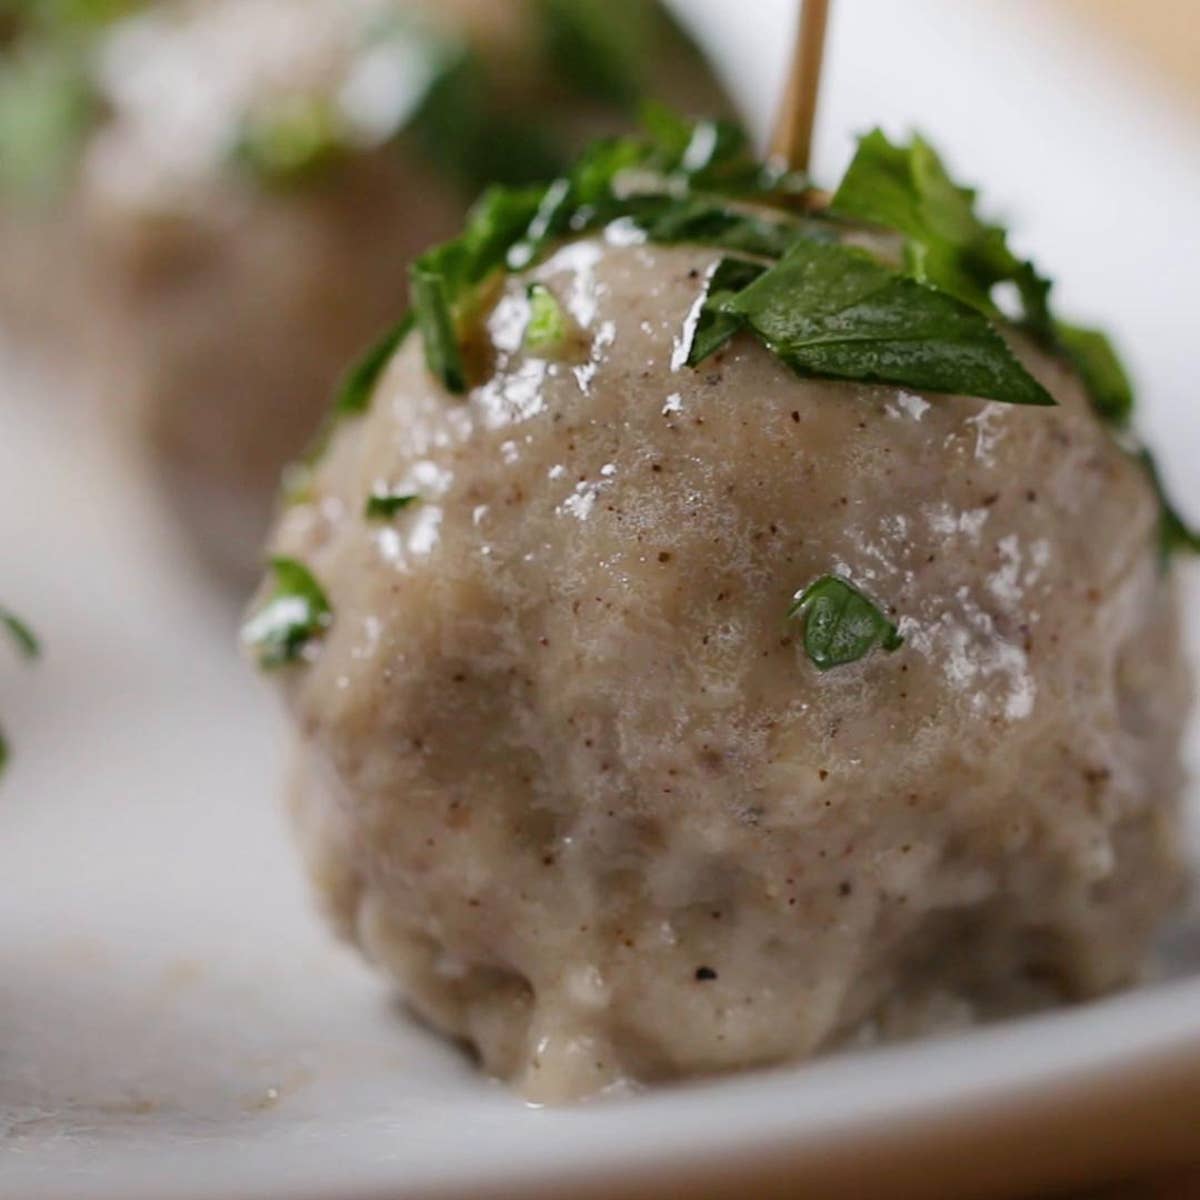 Easy Swedish Meatballs in Sauce Recipe - Home. Made. Interest.